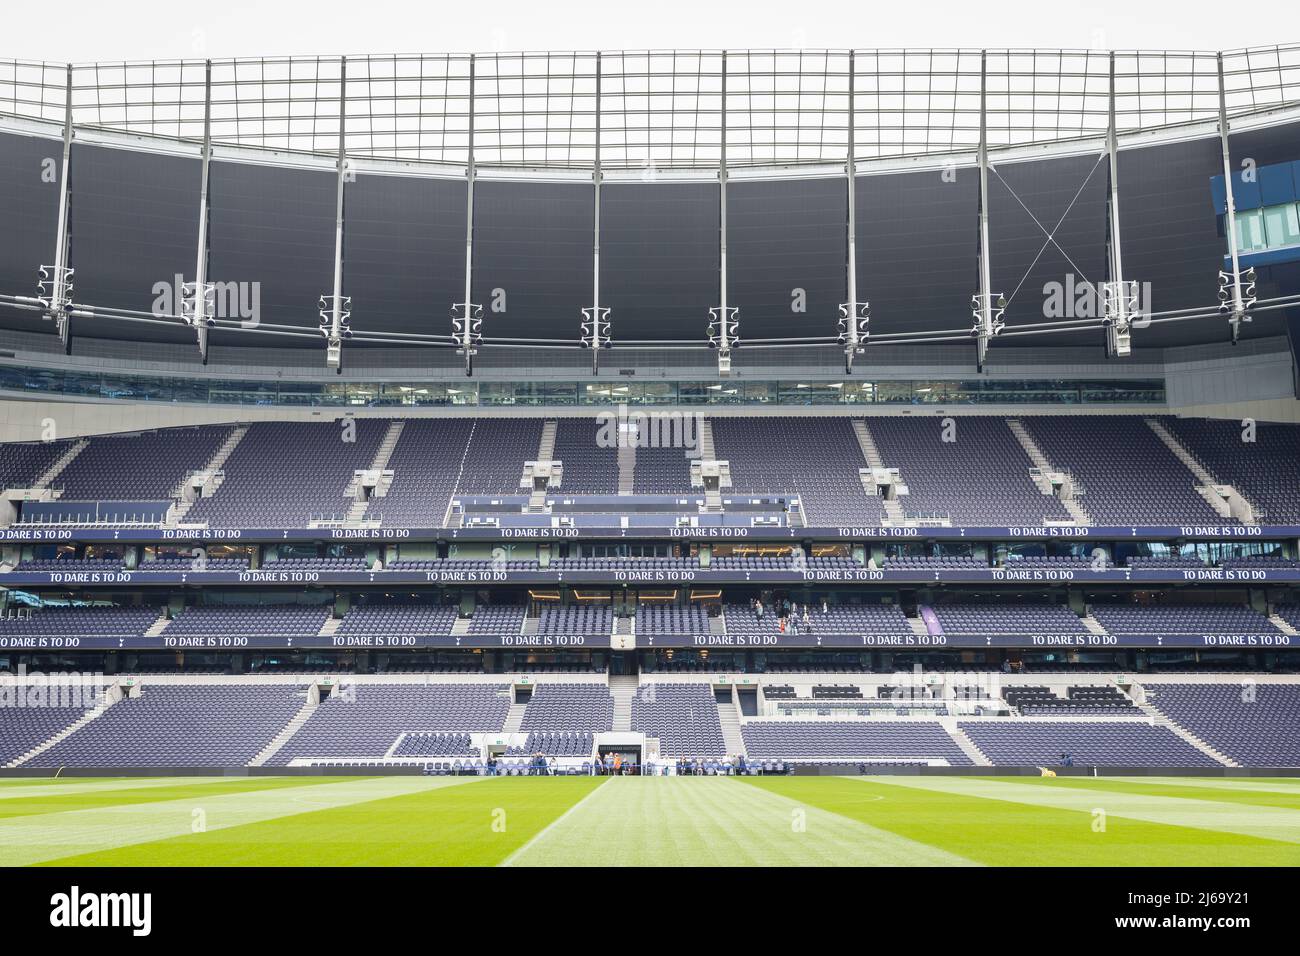 view of the empty pitch and stand of the Tottenham Hotspur football stadium Stock Photo